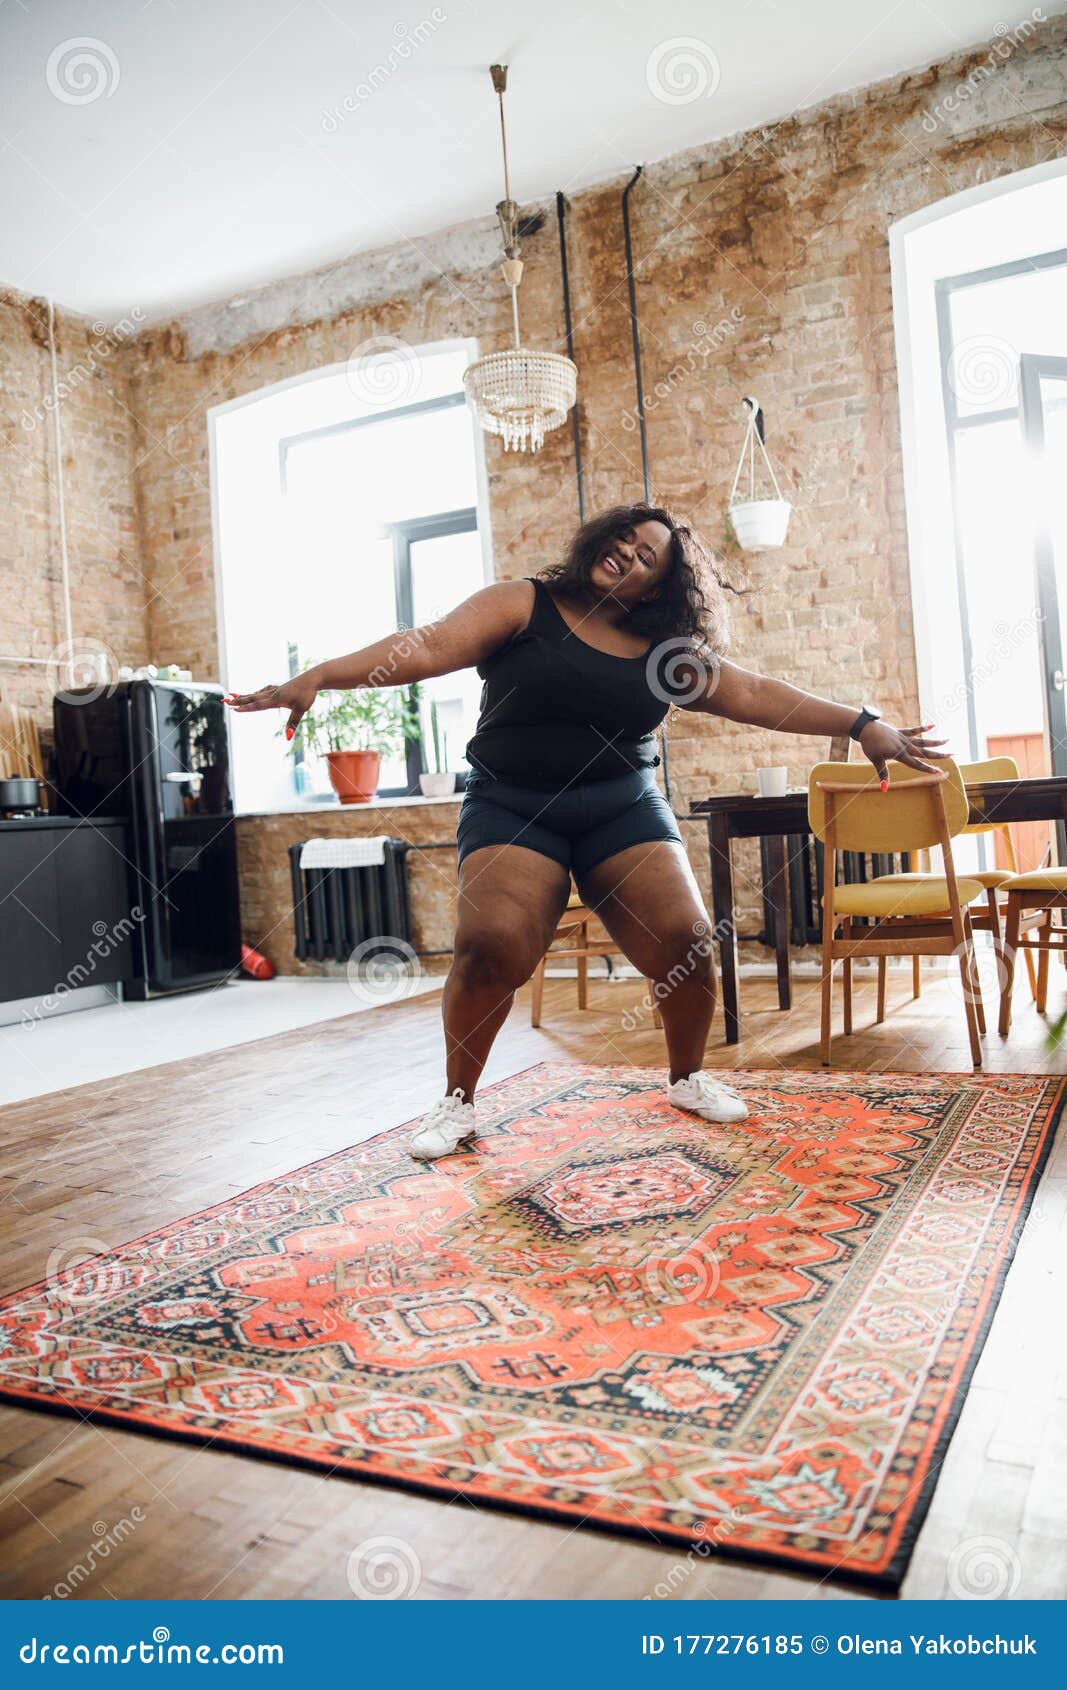 learning new dance movements and feeling good stock photo